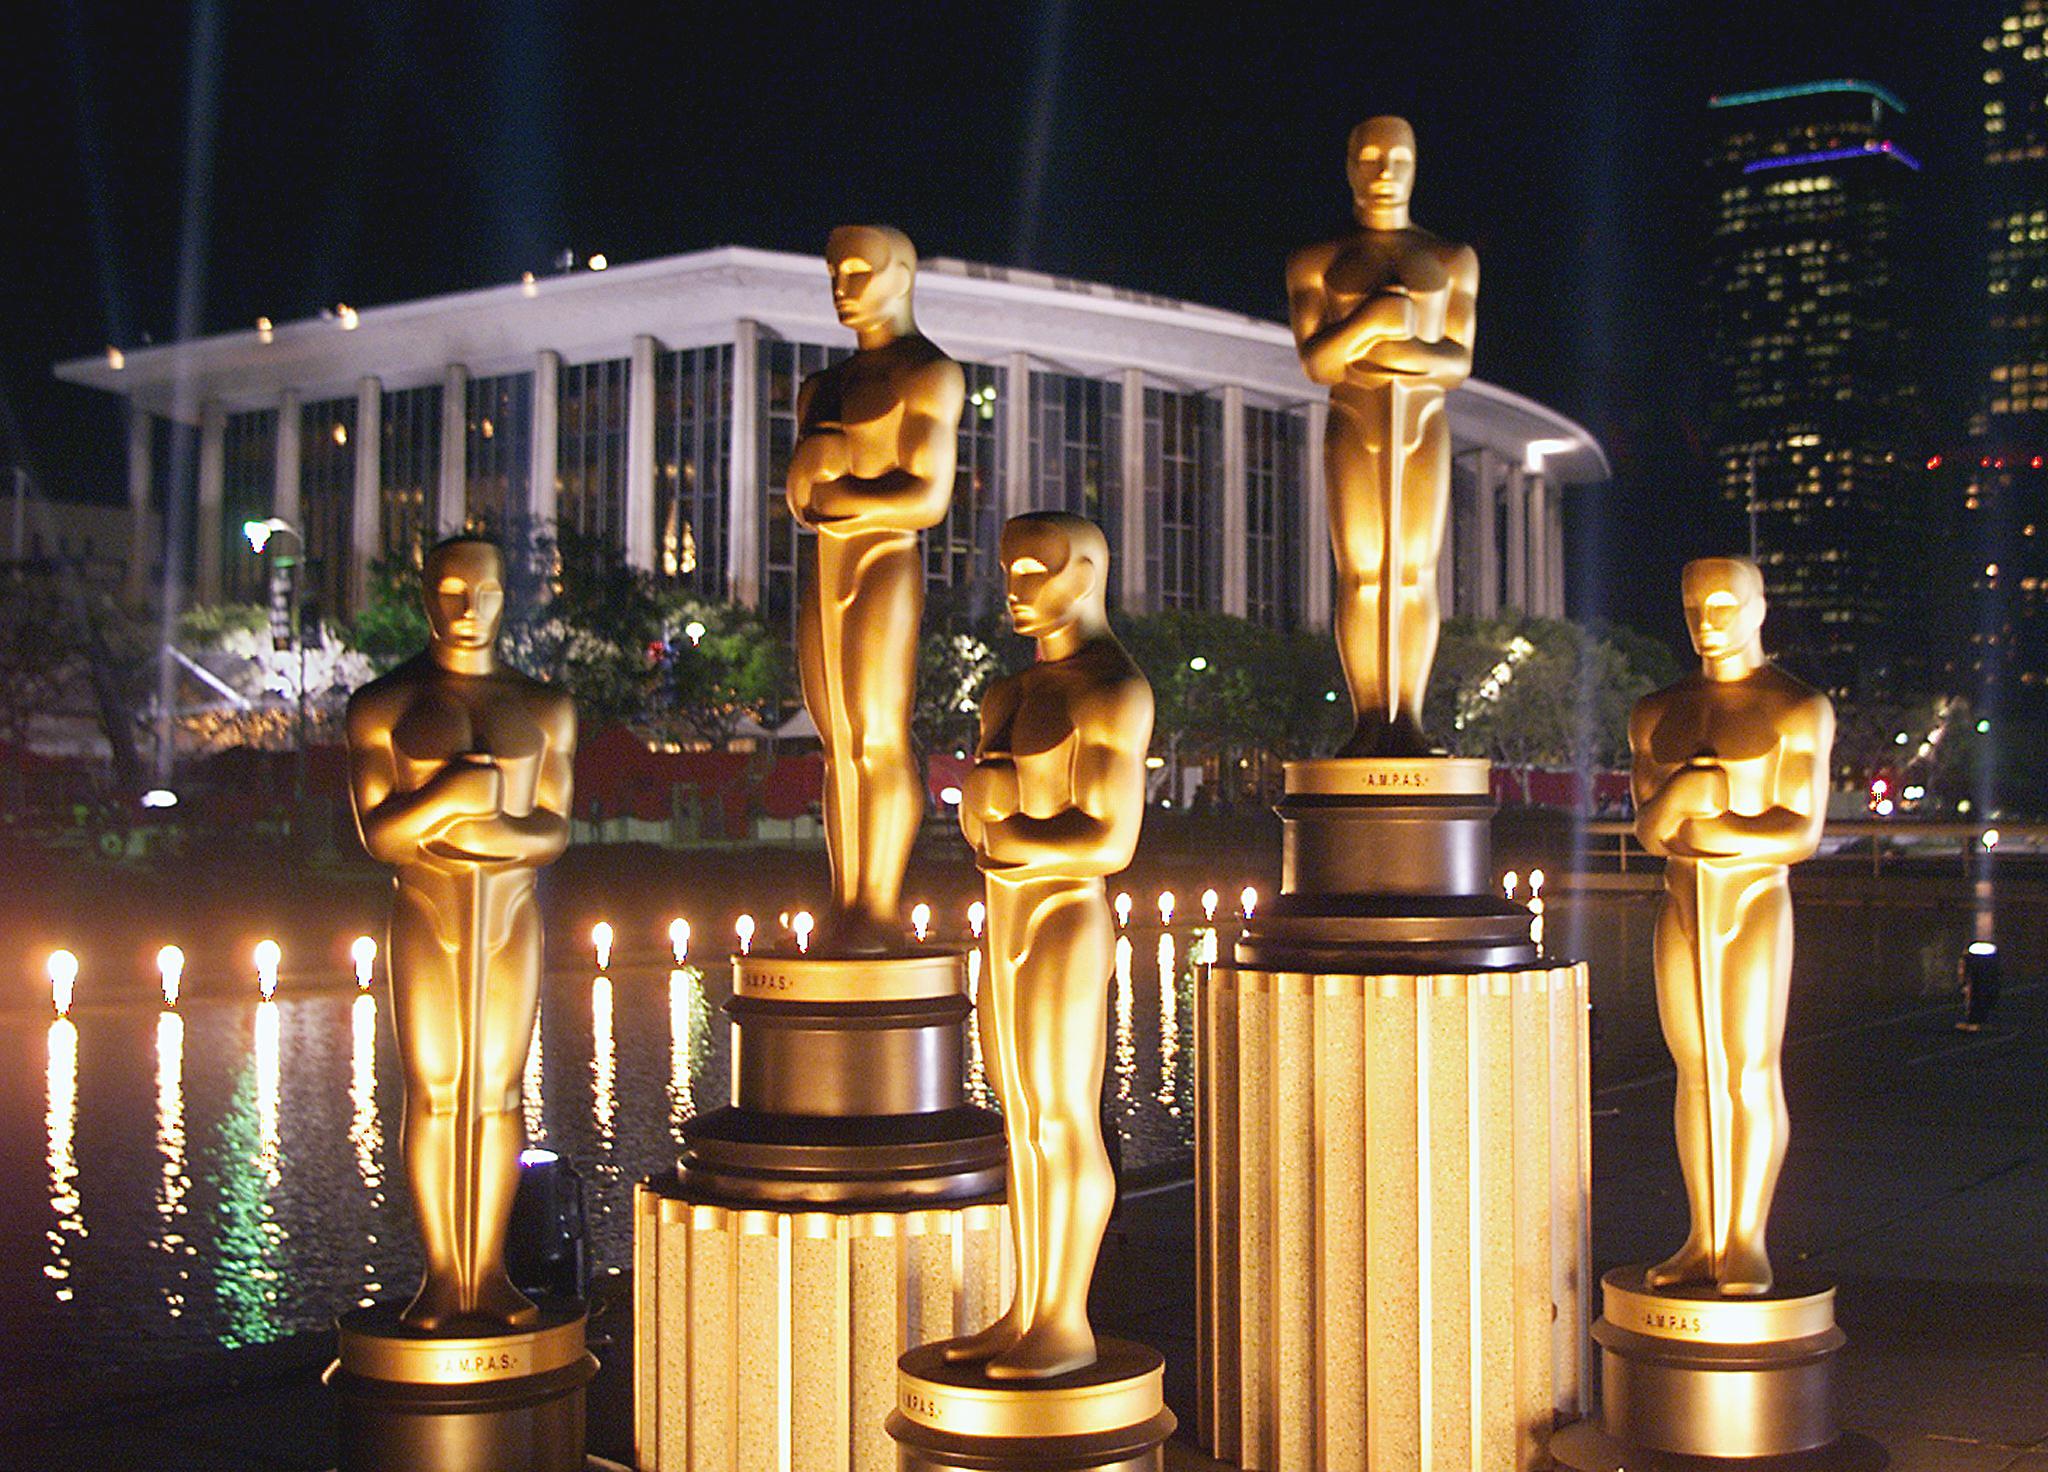 Replicas of Oscar statues are lit in the night out